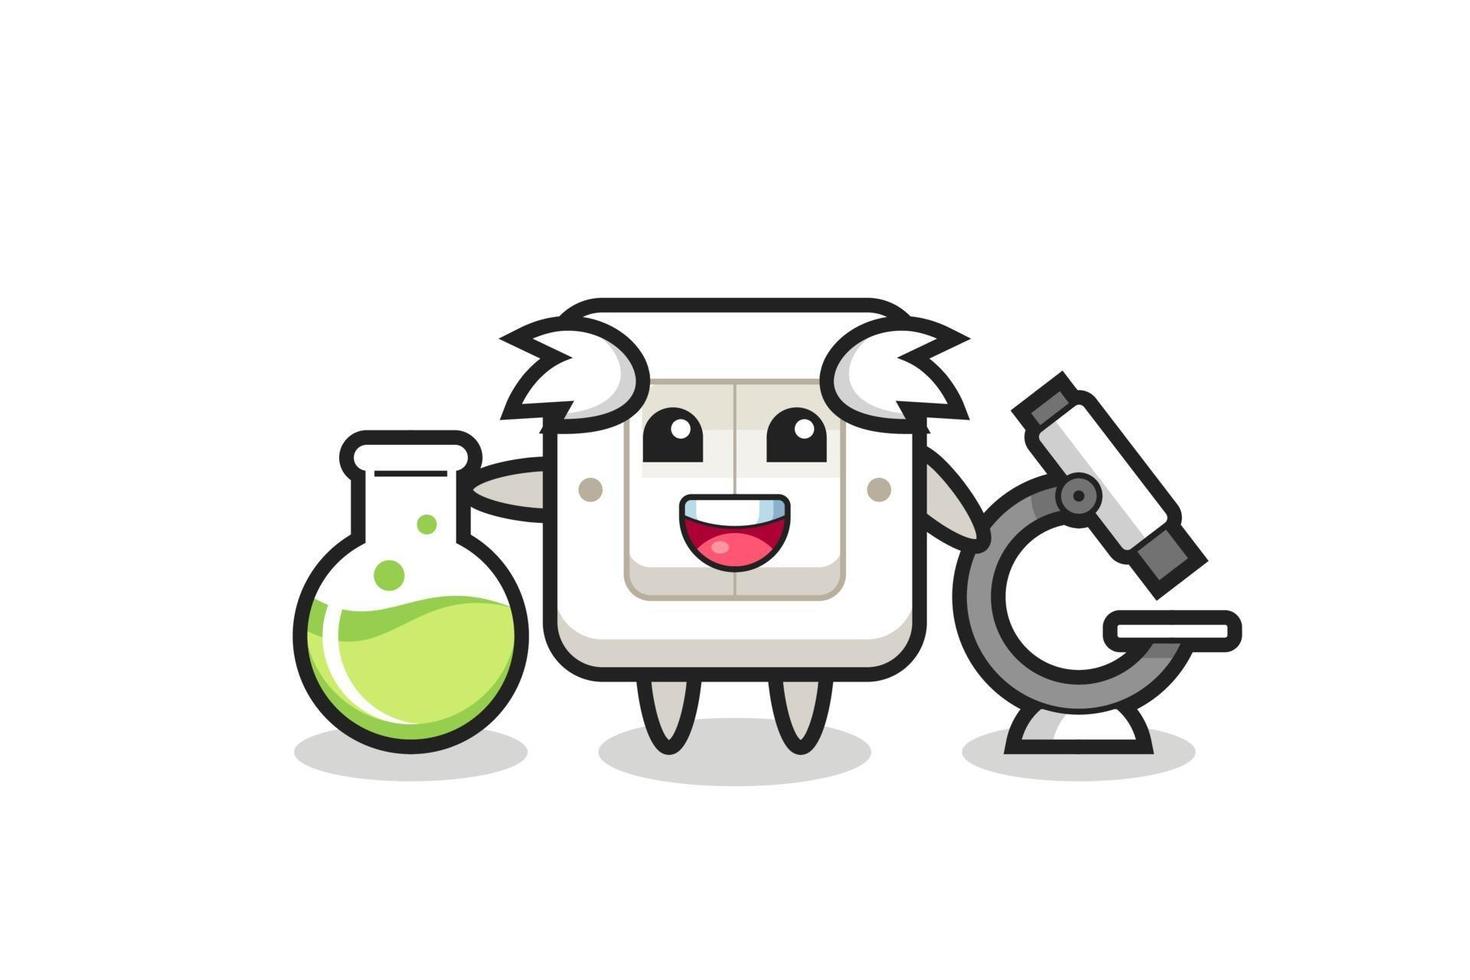 Mascot character of light switch as a scientist vector